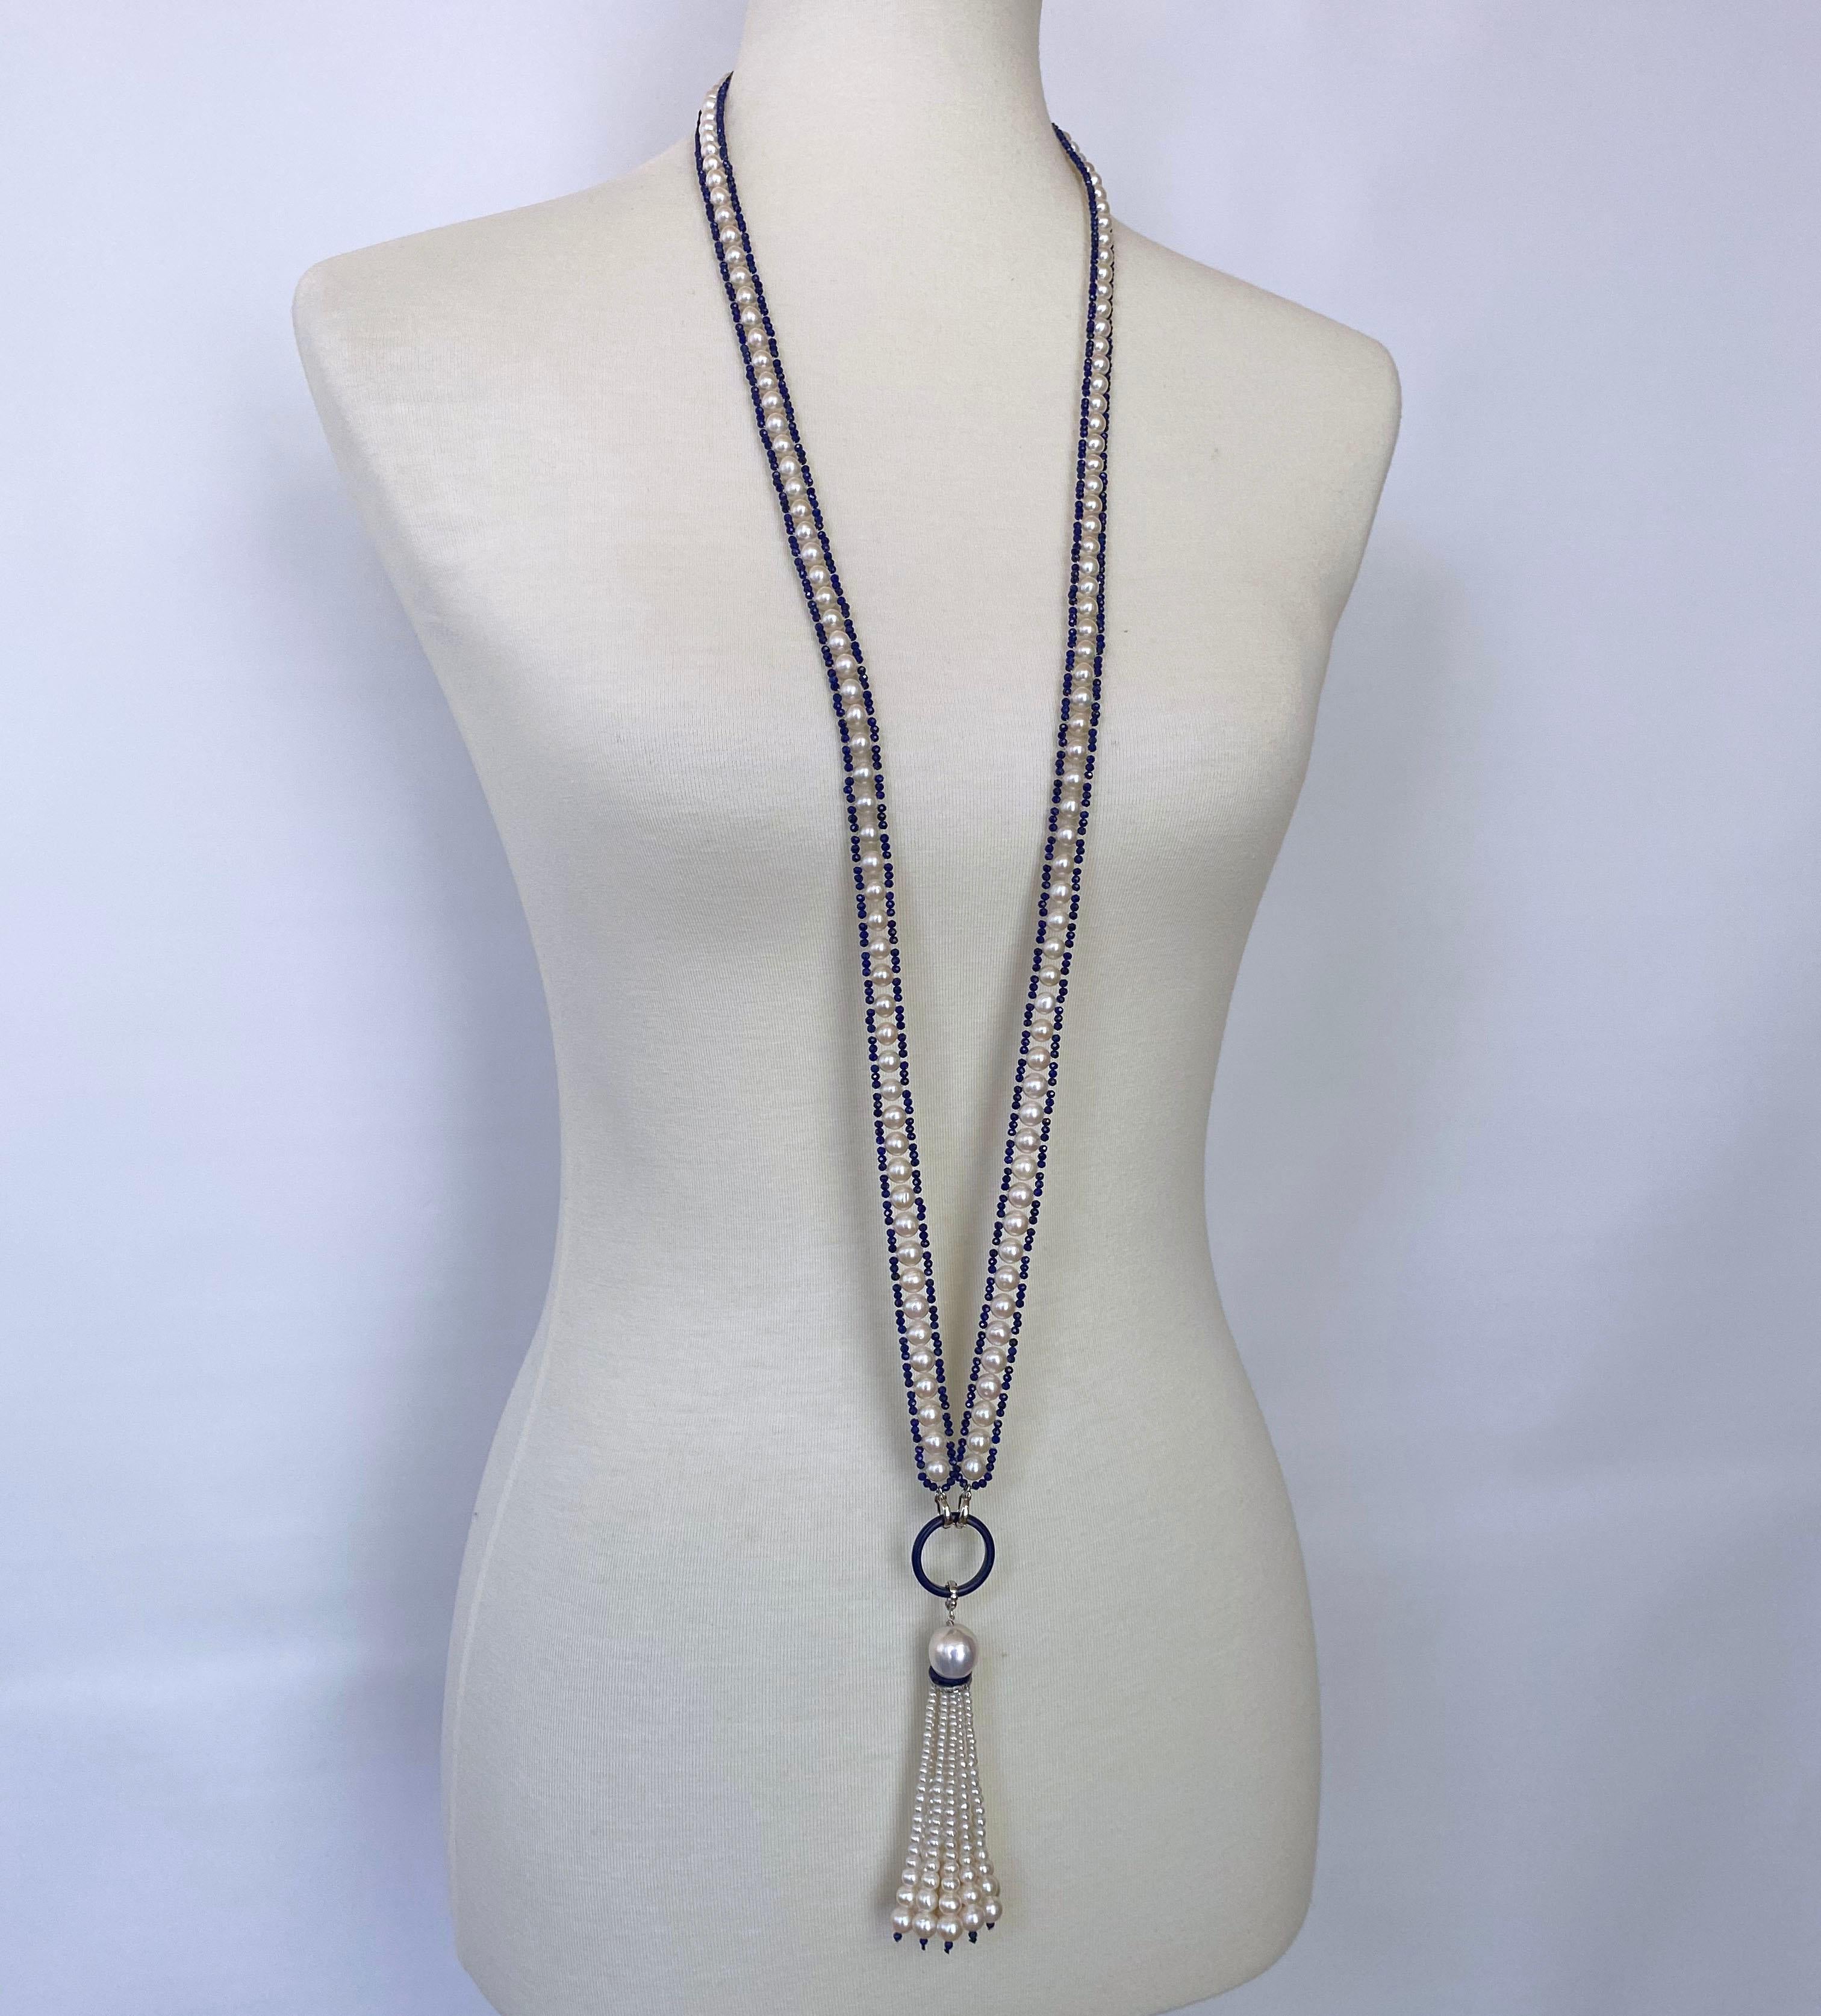 This white pearl and bright blue lapis lazuli beaded sautoir necklace has a removable tassel and 14k white gold clasps. Each white pearl in the sautoir is surrounded by beautiful blue lapis lazuli beads in a ribbon-like design, that is timeless and